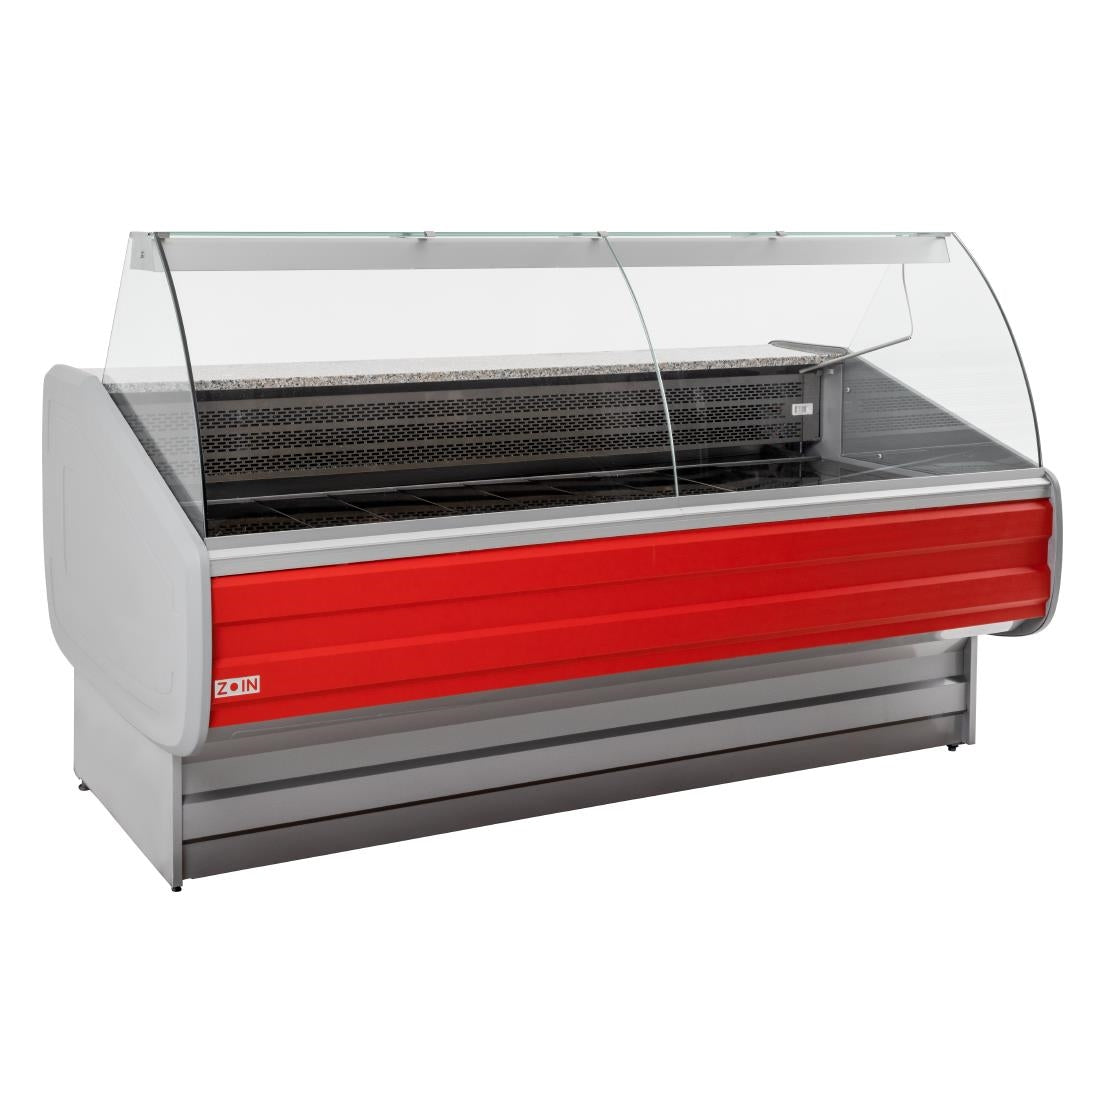 FP980-200 Zoin Melody Deli Serve Over Counter Chiller 2000mm MY200B JD Catering Equipment Solutions Ltd